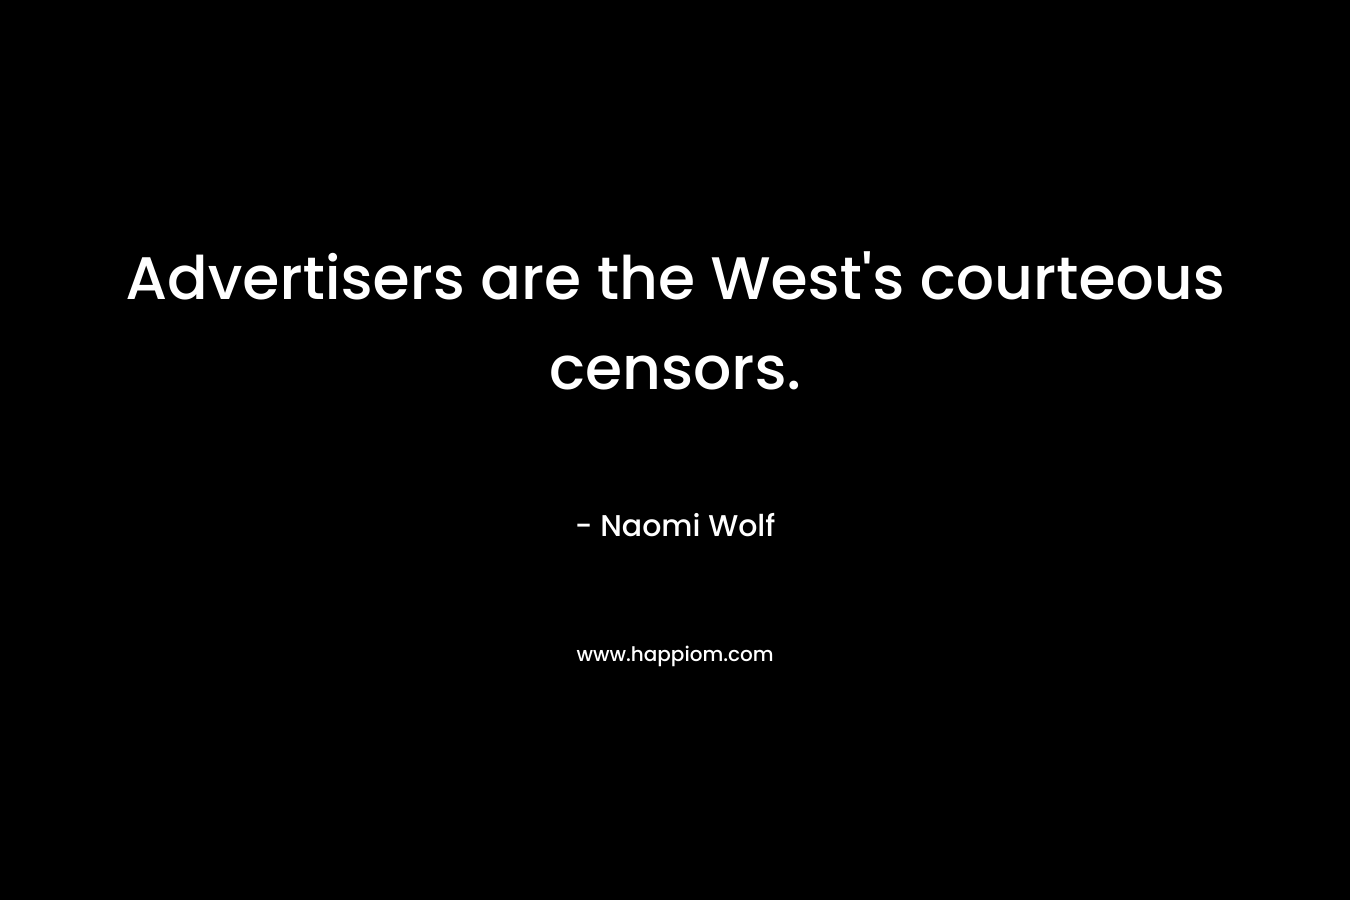 Advertisers are the West’s courteous censors. – Naomi Wolf